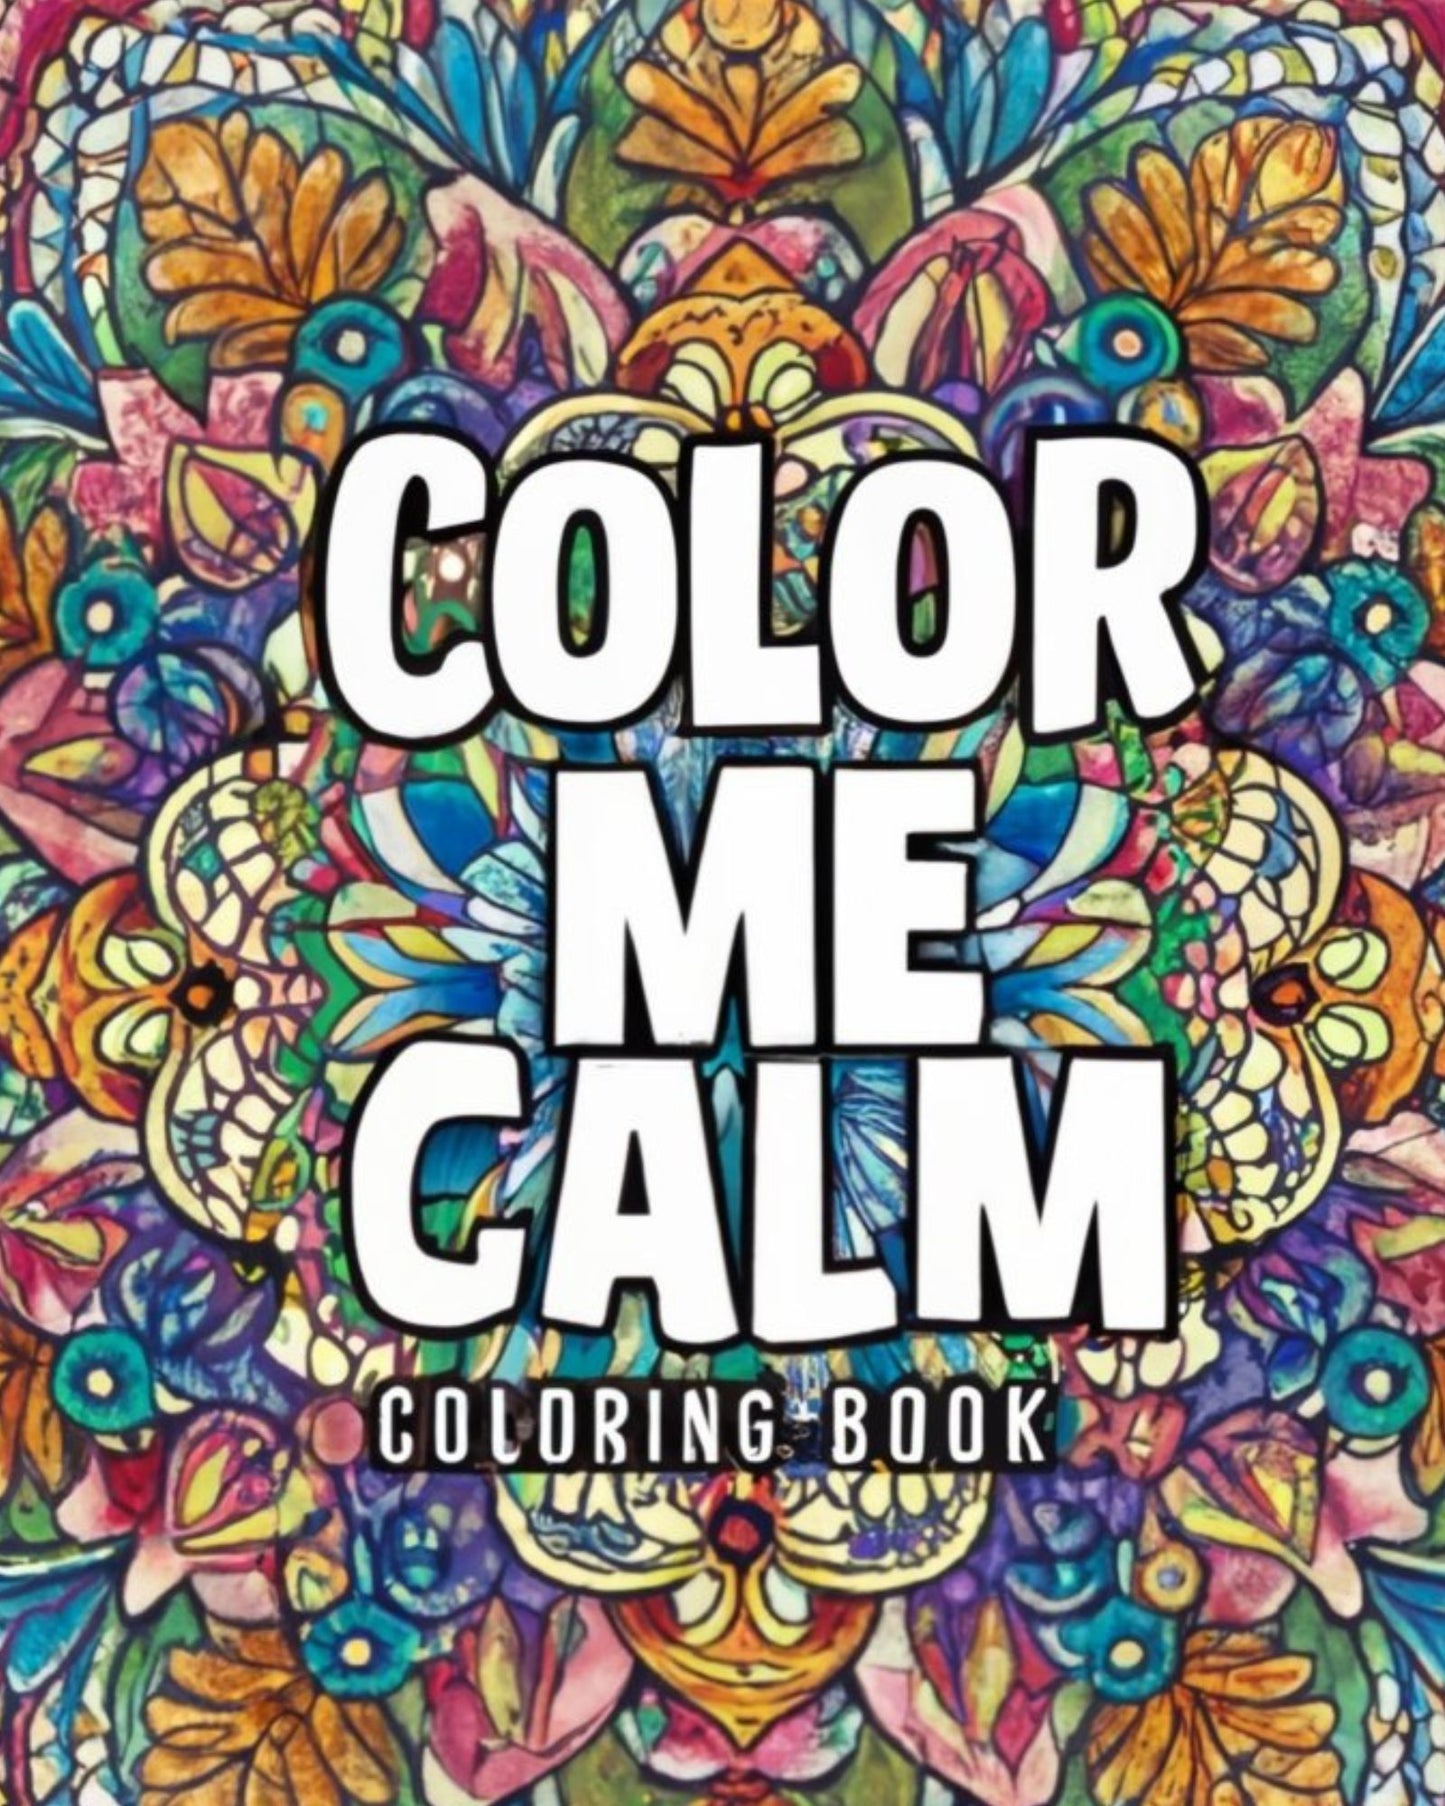 Color me Calm: Adult Coloring Book (Adult Coloring Books - Stress Relief and Self Care) Paperback ©️